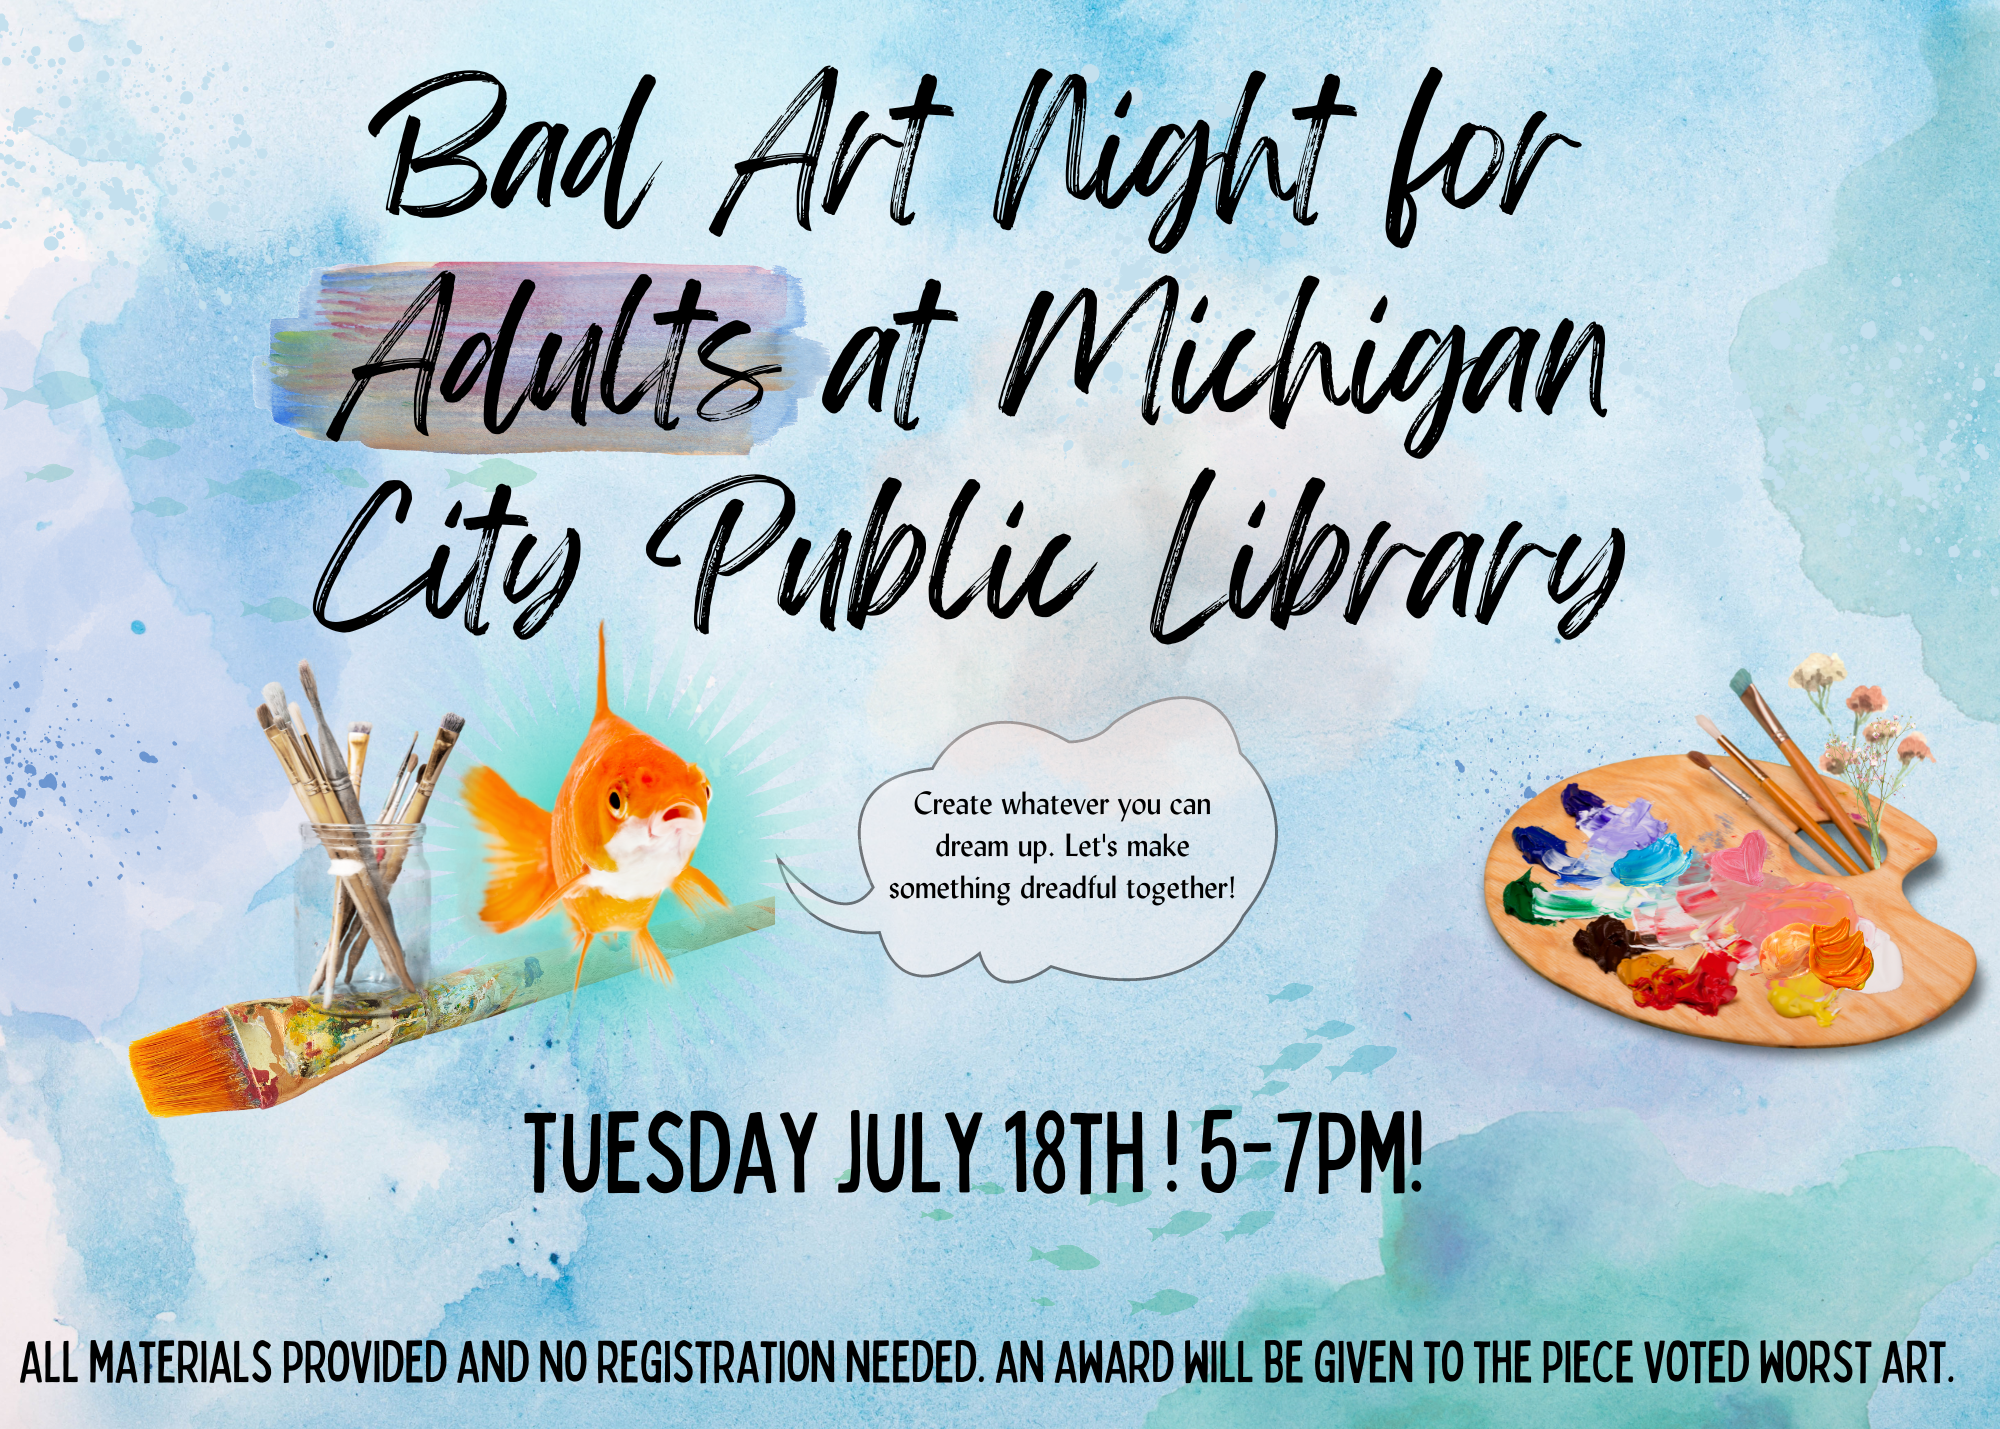 Bad Art Night for Adults at Michigan City Public Library, Tuesday, July 18 at 5:00 pm